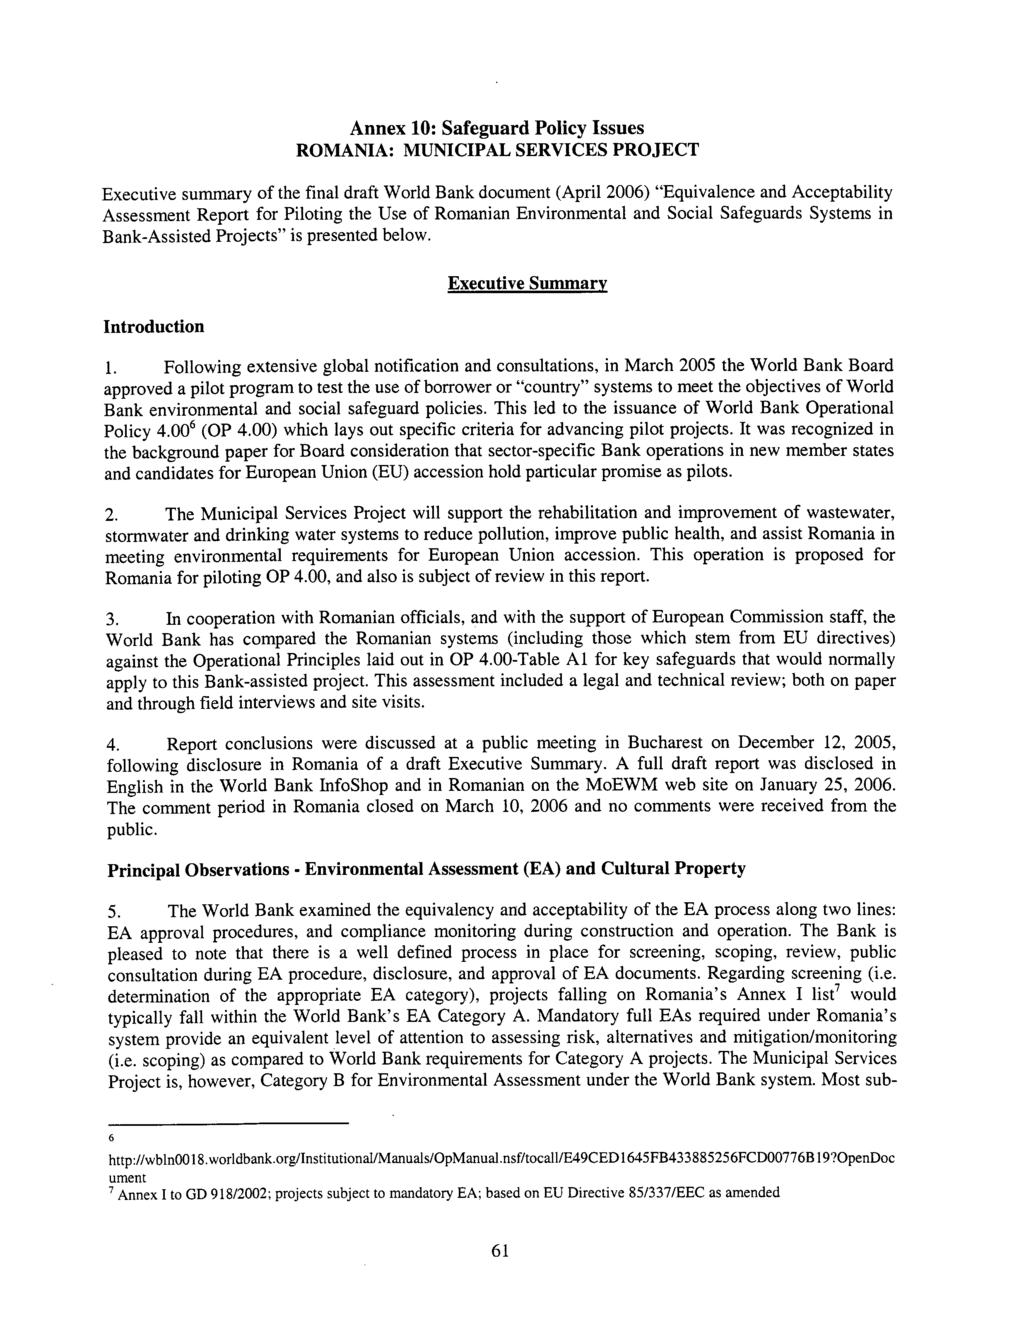 Annex 10: Safeguard Policy Issues ROMANIA: MUNICIPAL SERVICES PROJECT Executive summary of the final draft World Bank document (April 2006) Equivalence and Acceptability Assessment Report for